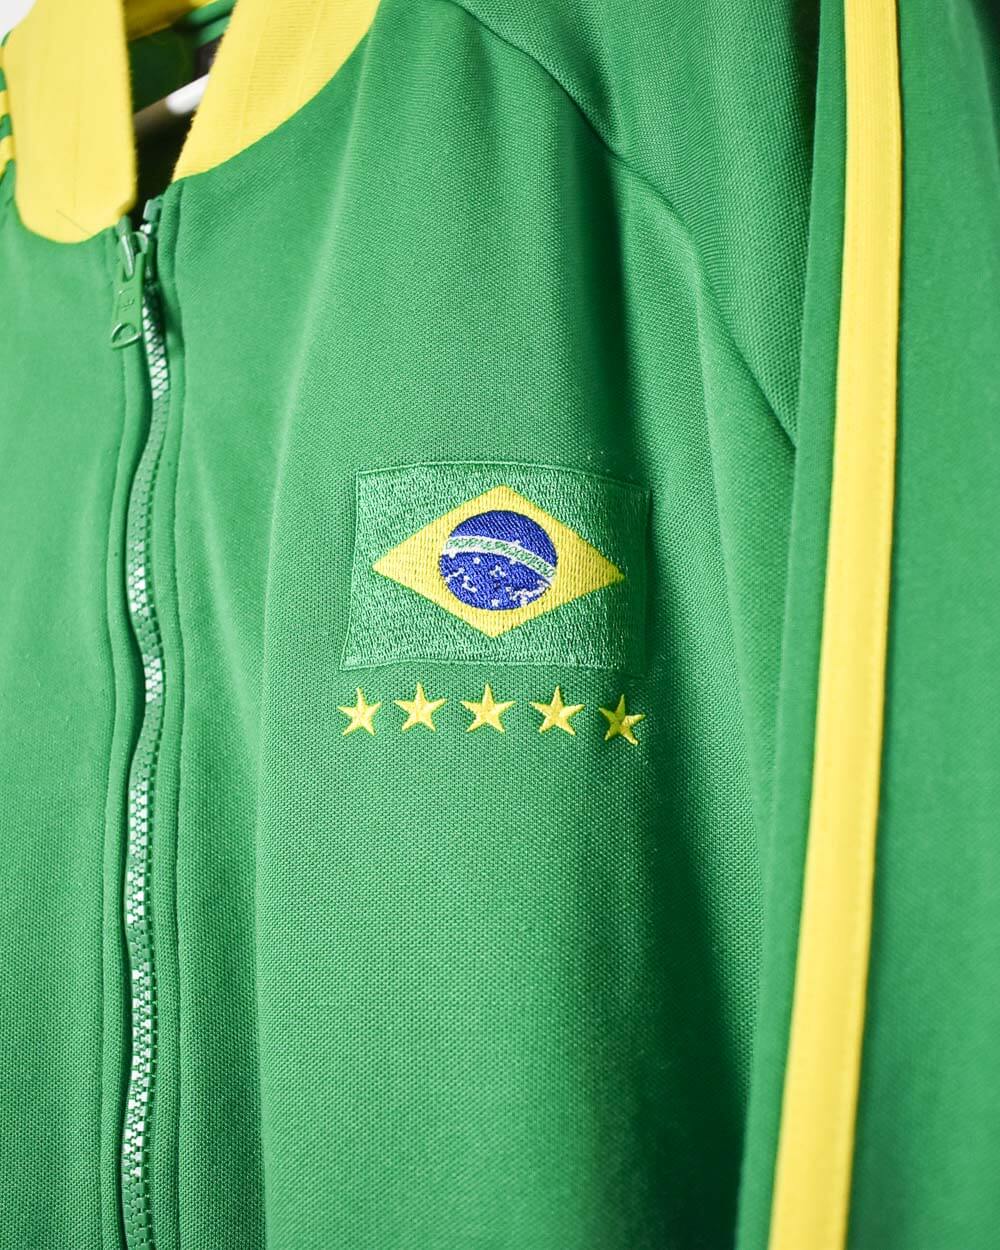 Green Adidas 2010 Brazil National Team Tracksuit Top - XX-Large